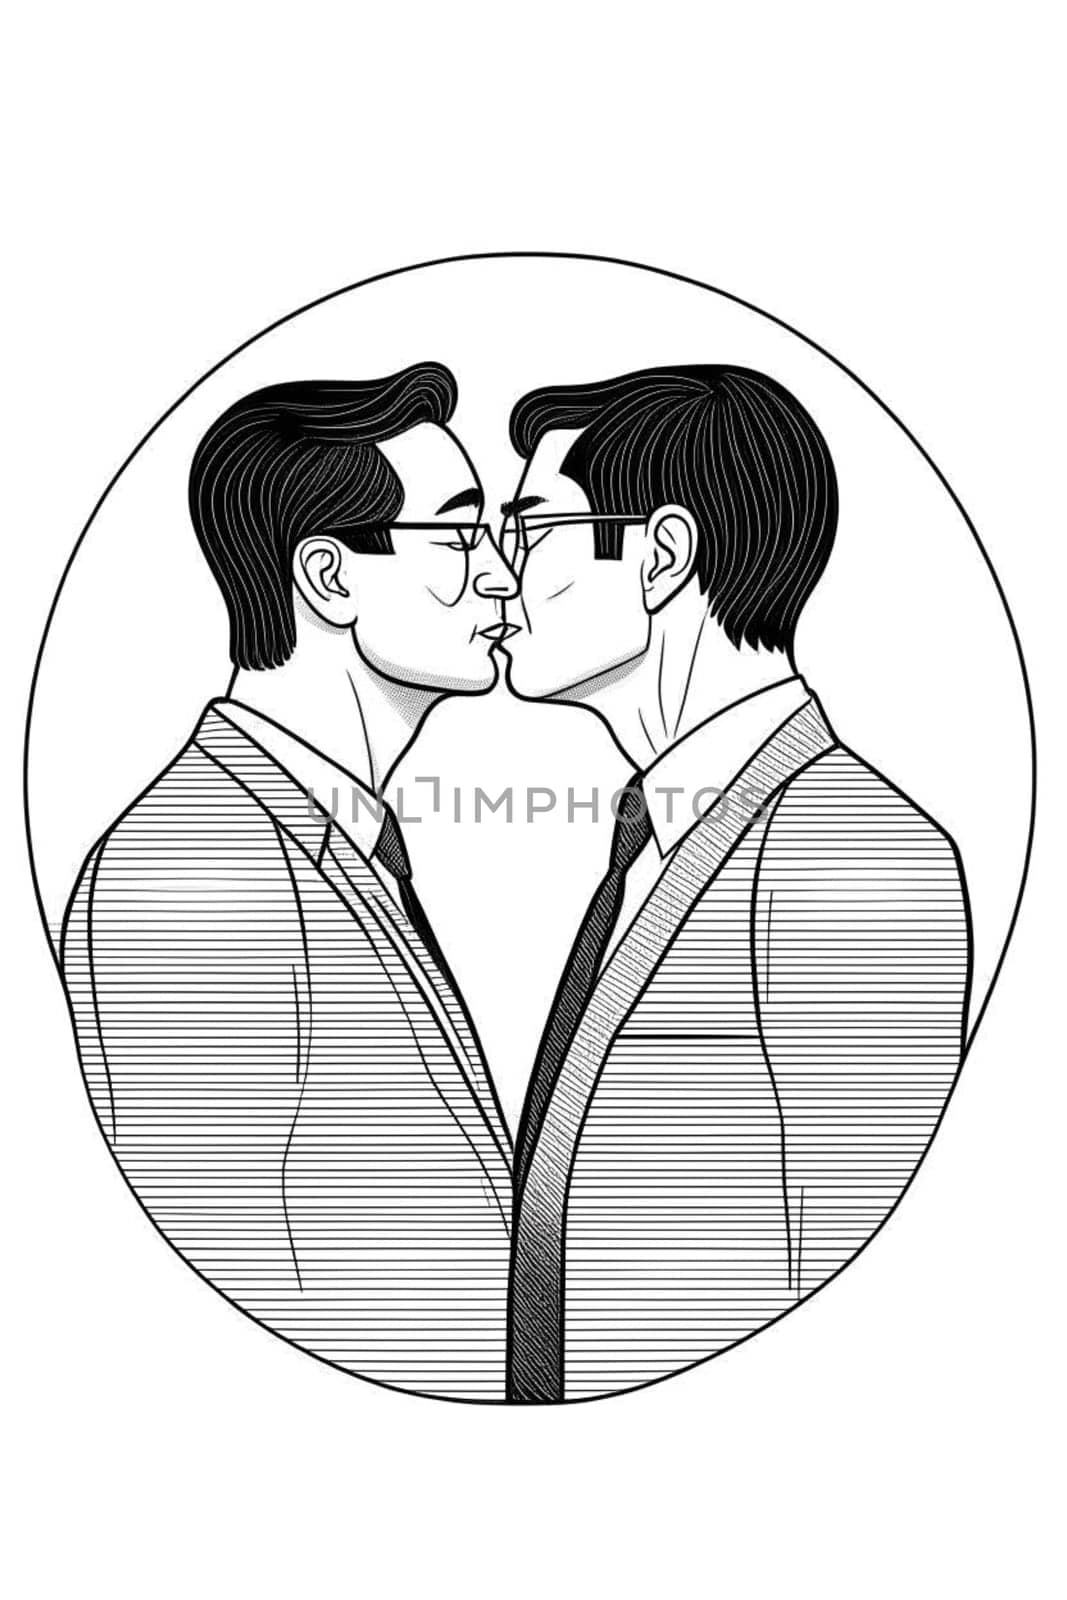 black and white geometric illustration of gay homosexual couple kissing, lgtb love concept by verbano